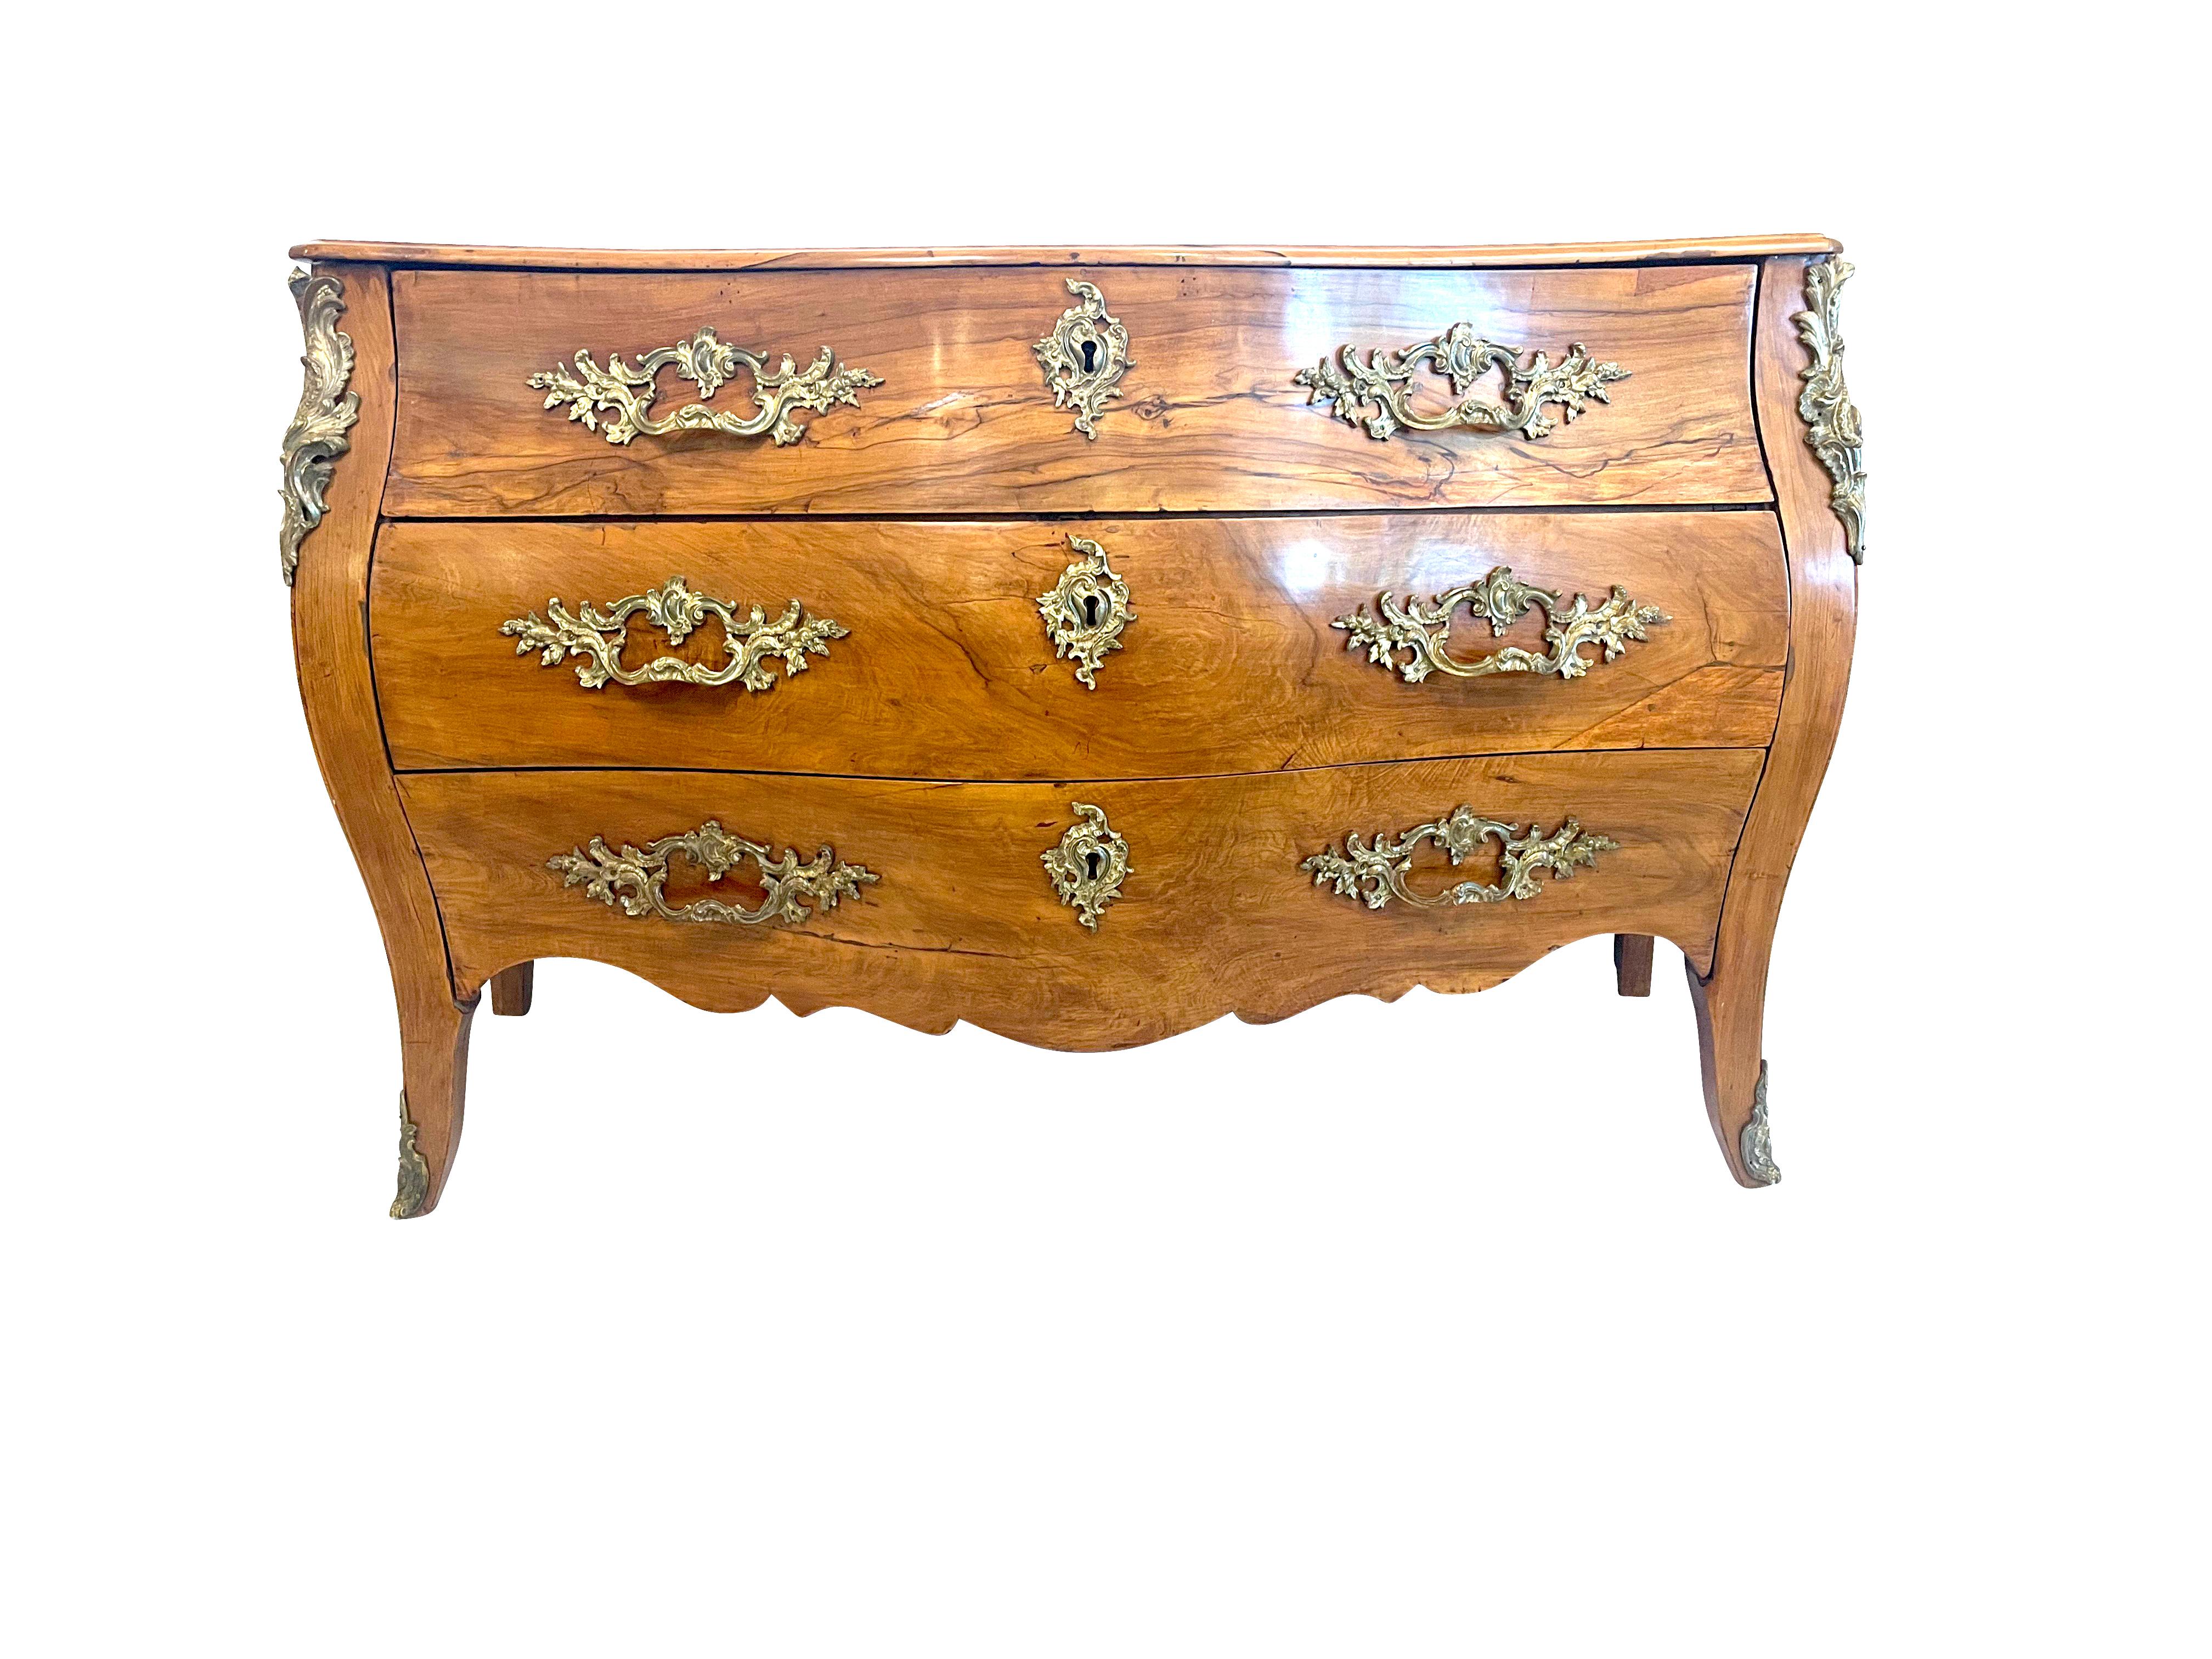 A large elegant late 18th century period Louis XV serpentine front three-drawer walnut commode/ chest with a lovely top in perfect condition with an outstanding patina to the entire piece. Original gilt bronze drawer pulls, and highly decorative